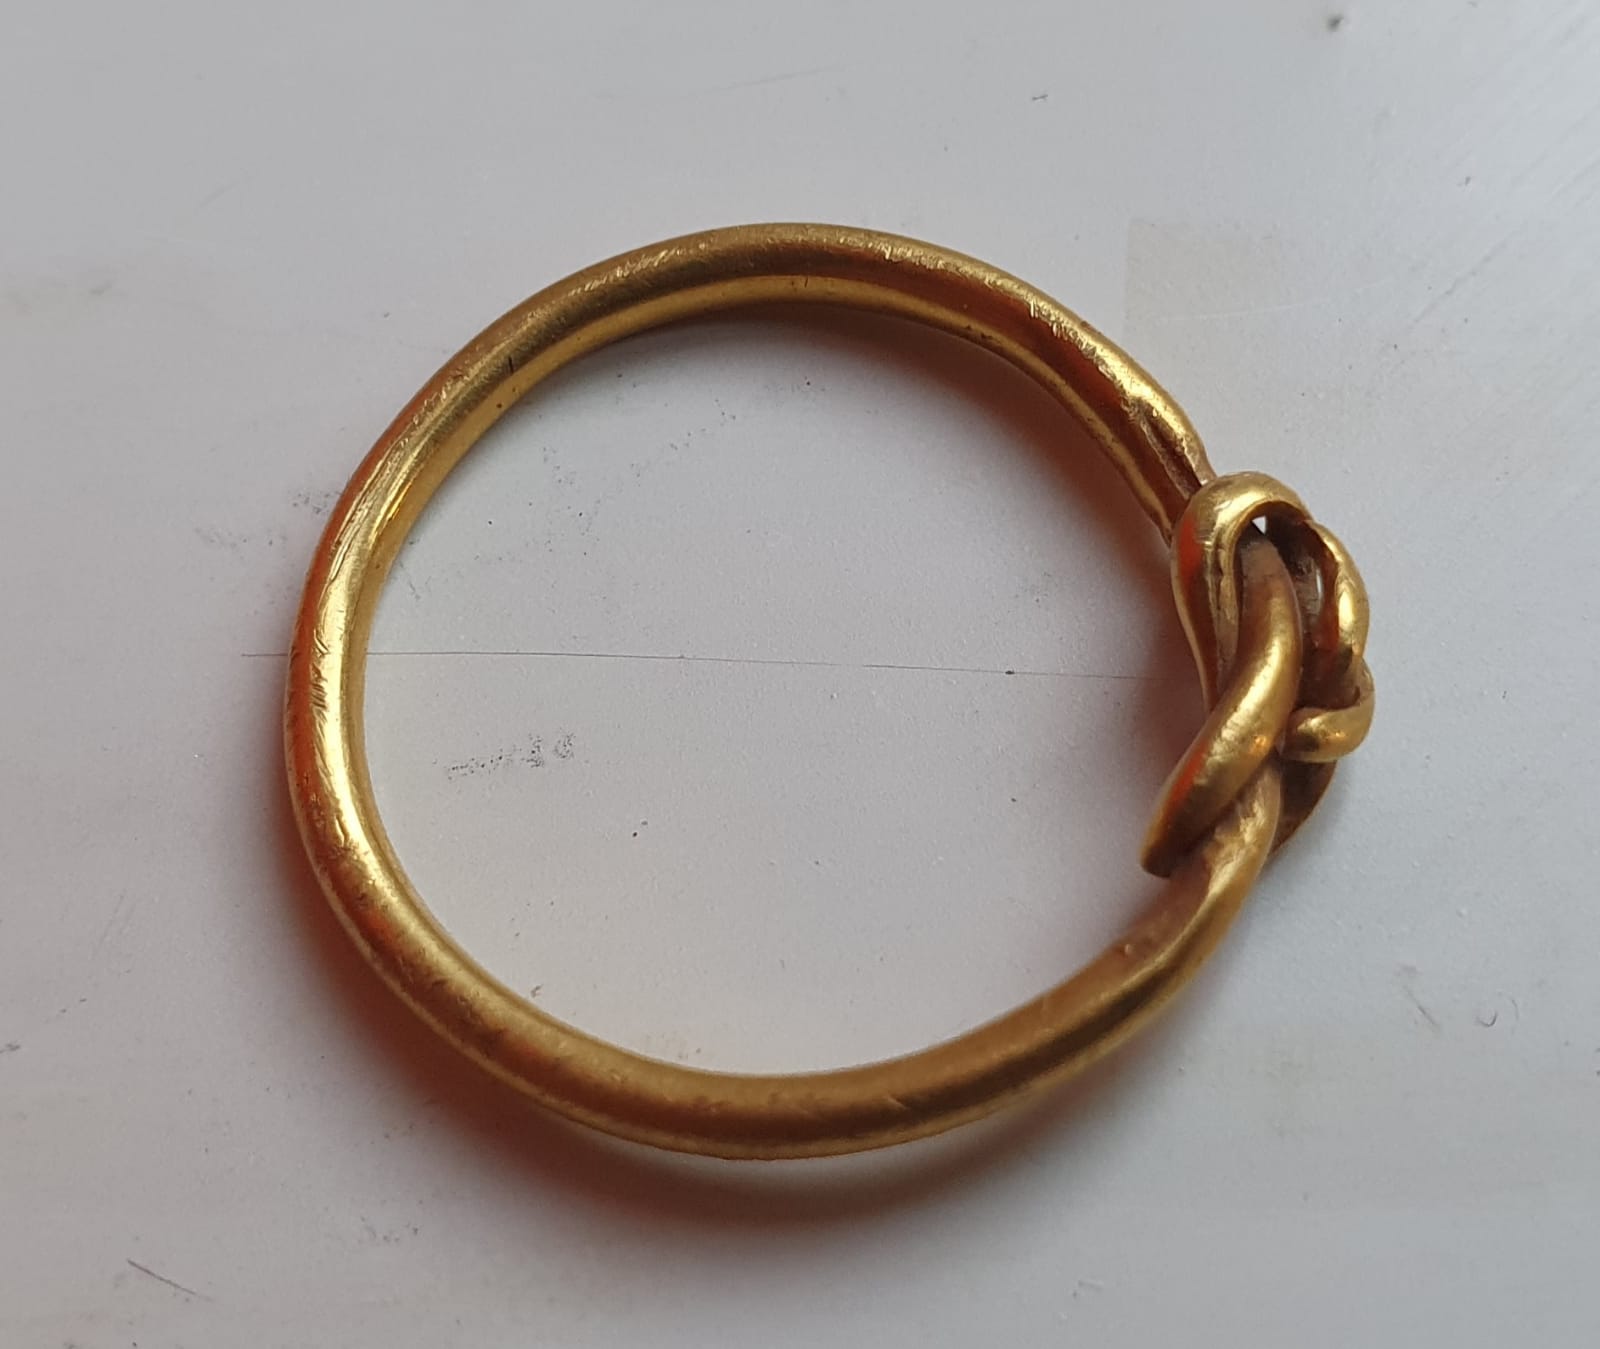 A Tudor gold finger ring, worked with a knot design, 21mm diameter. - Image 4 of 4